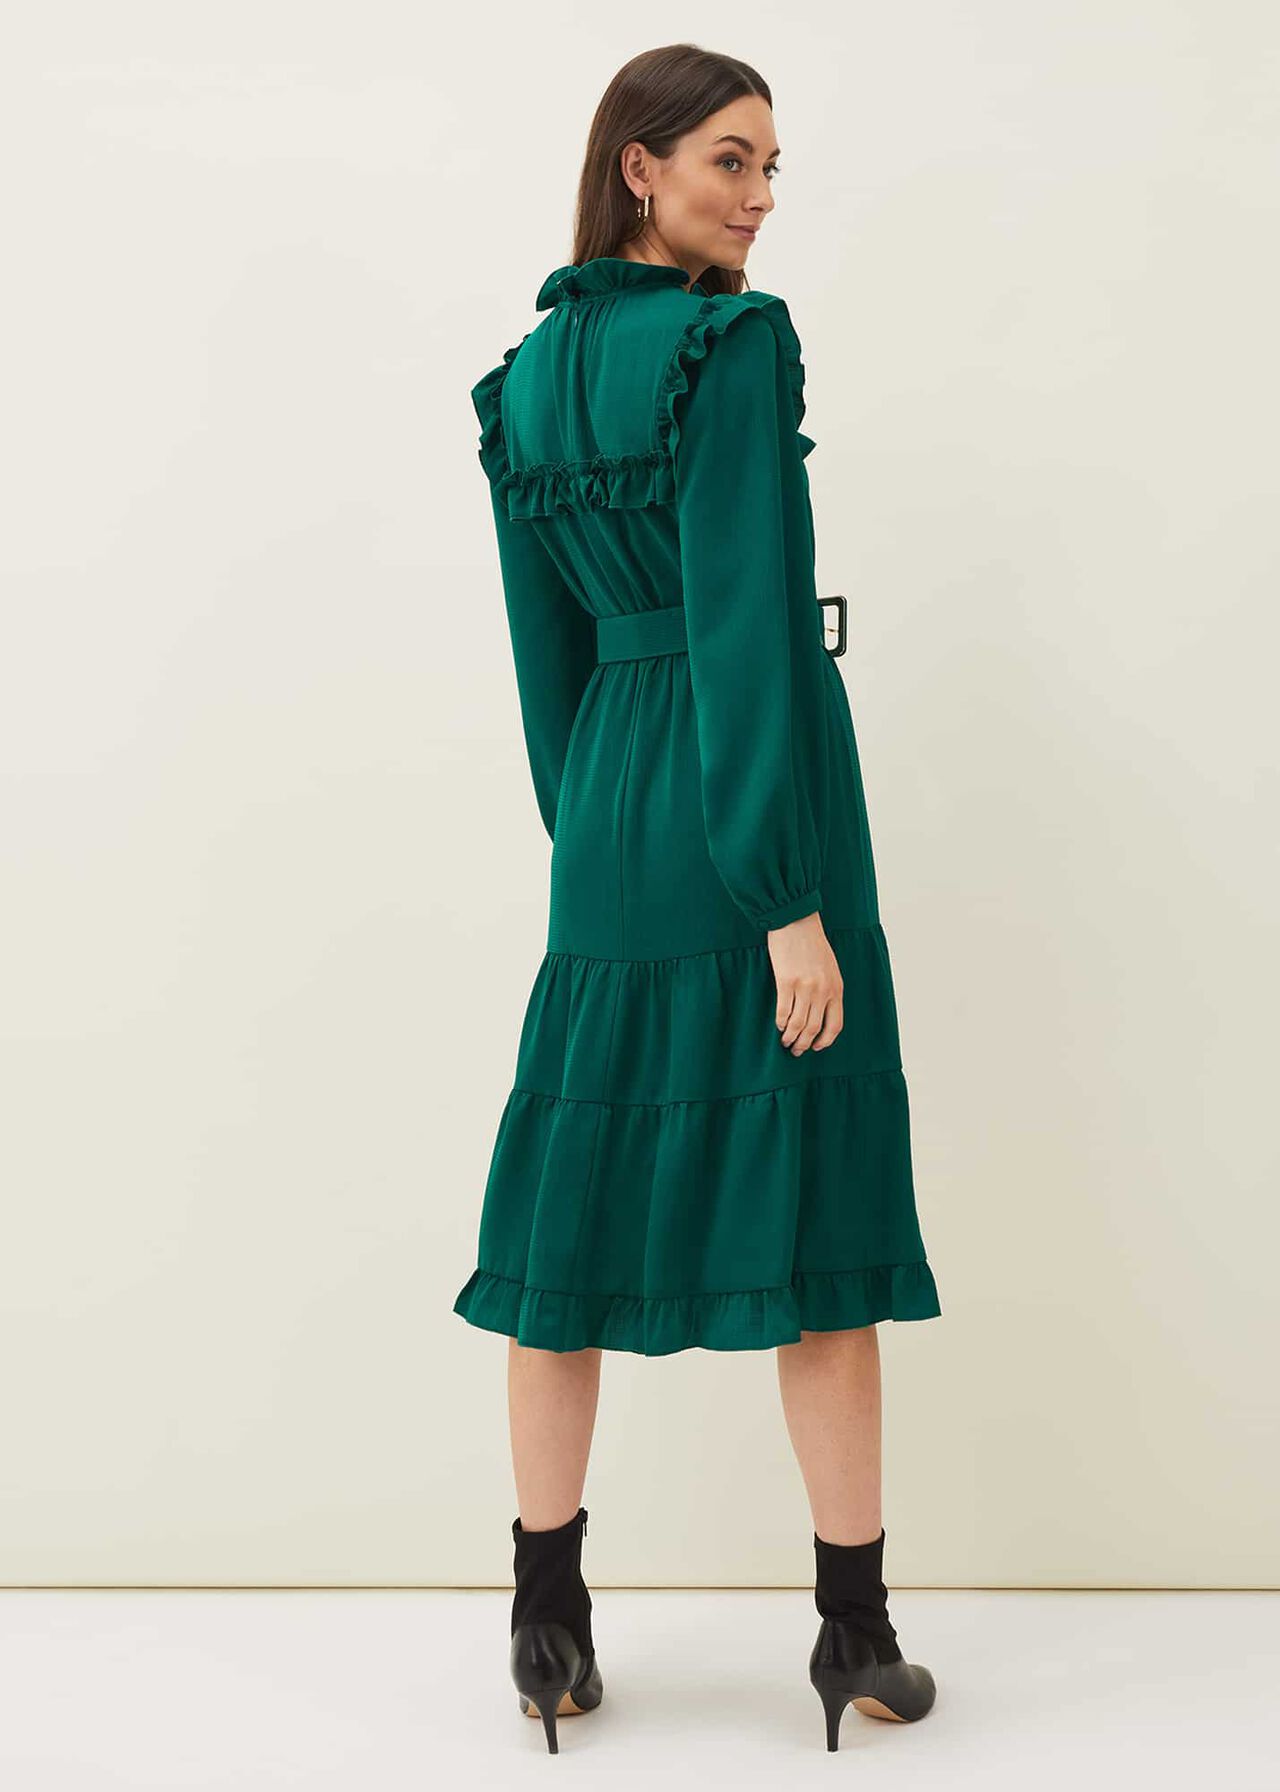 Olive Frill Tiered Dress